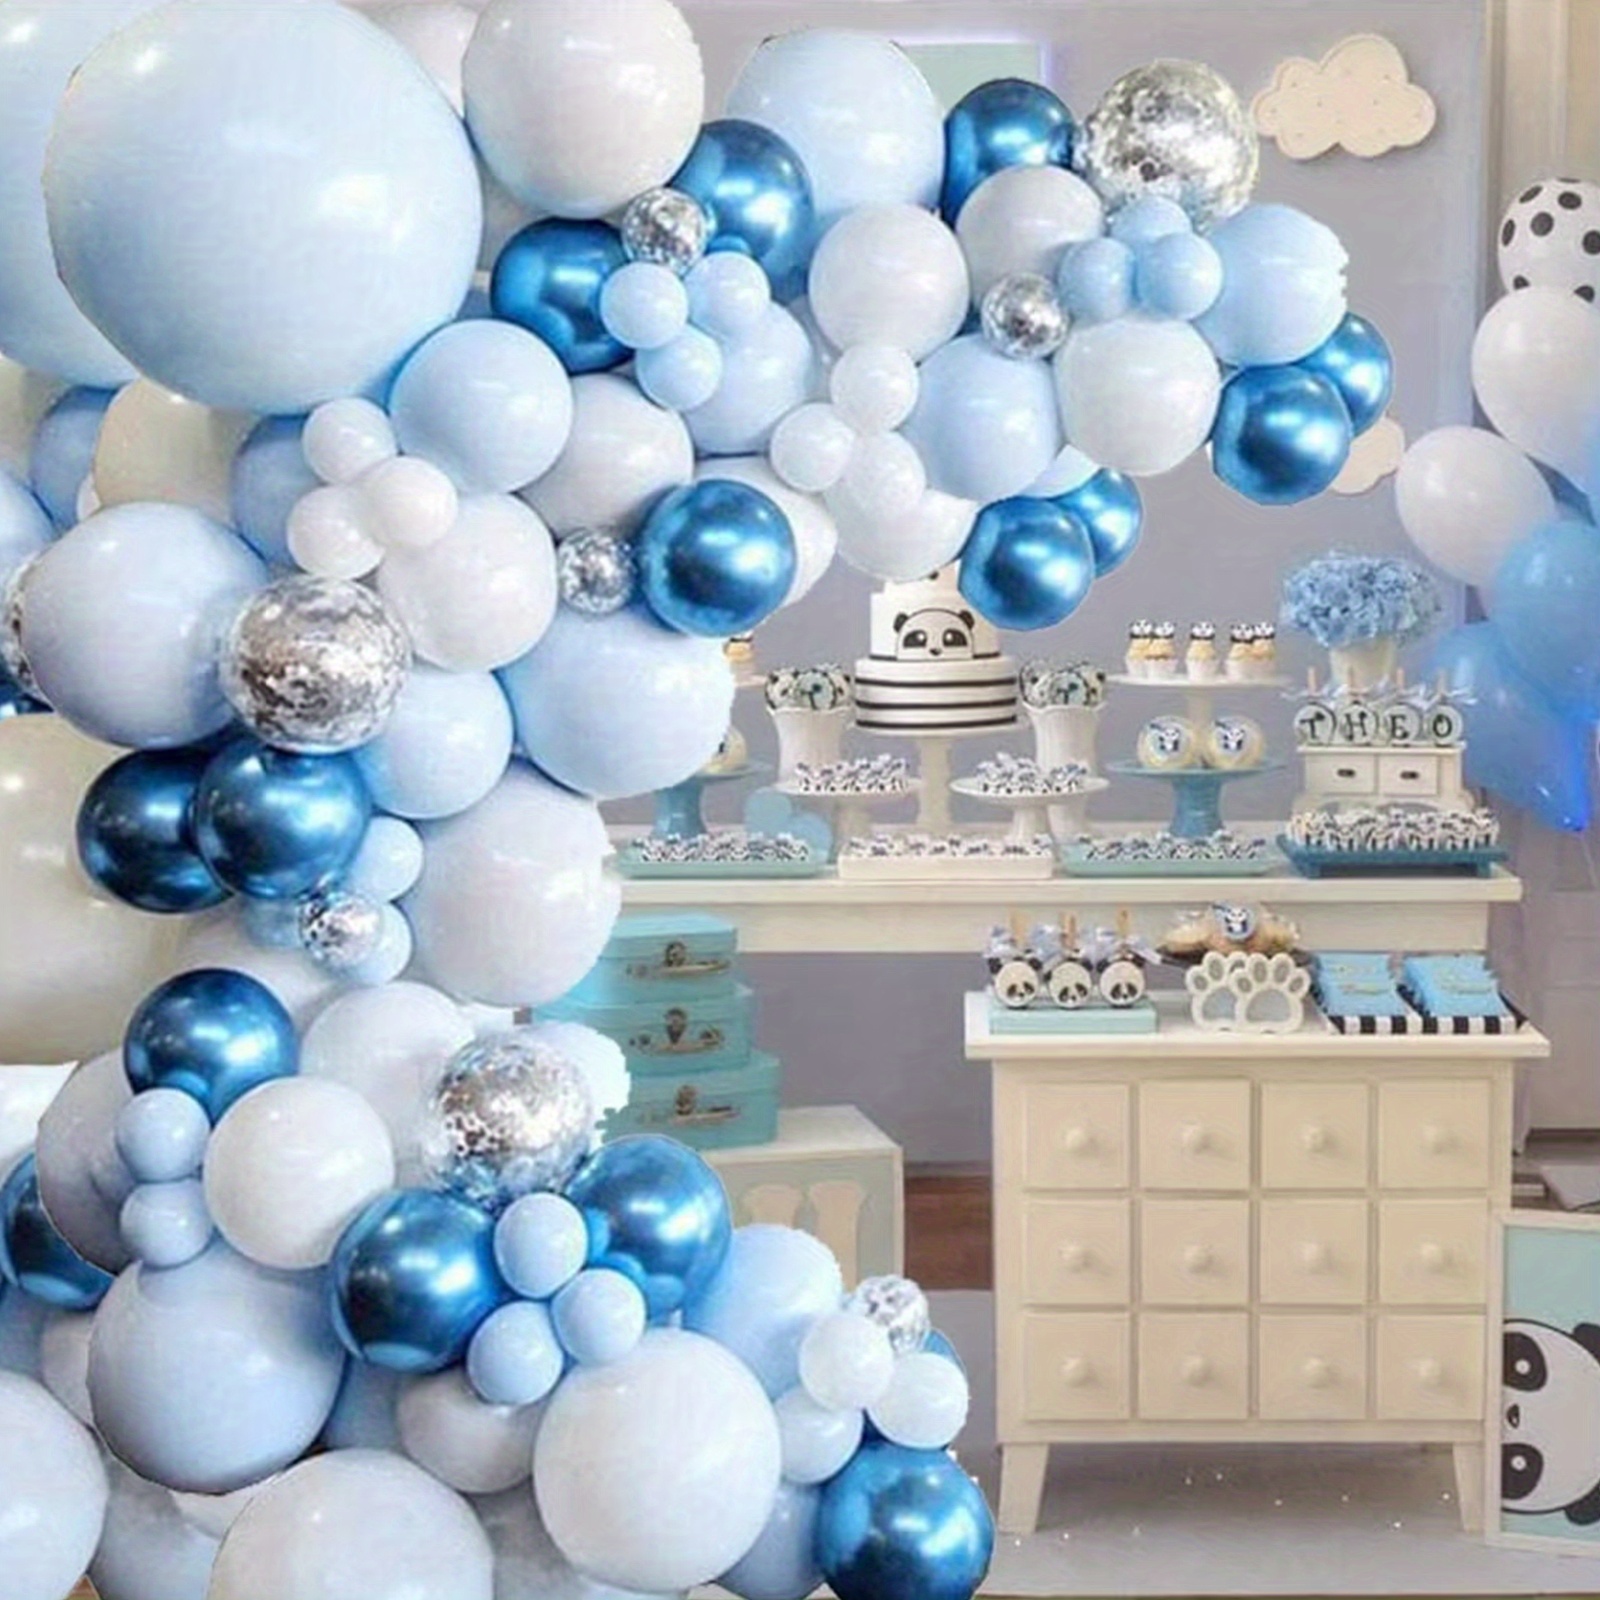 LoveKess Clothing - Navy-Blue White-Silver Party-Decorations